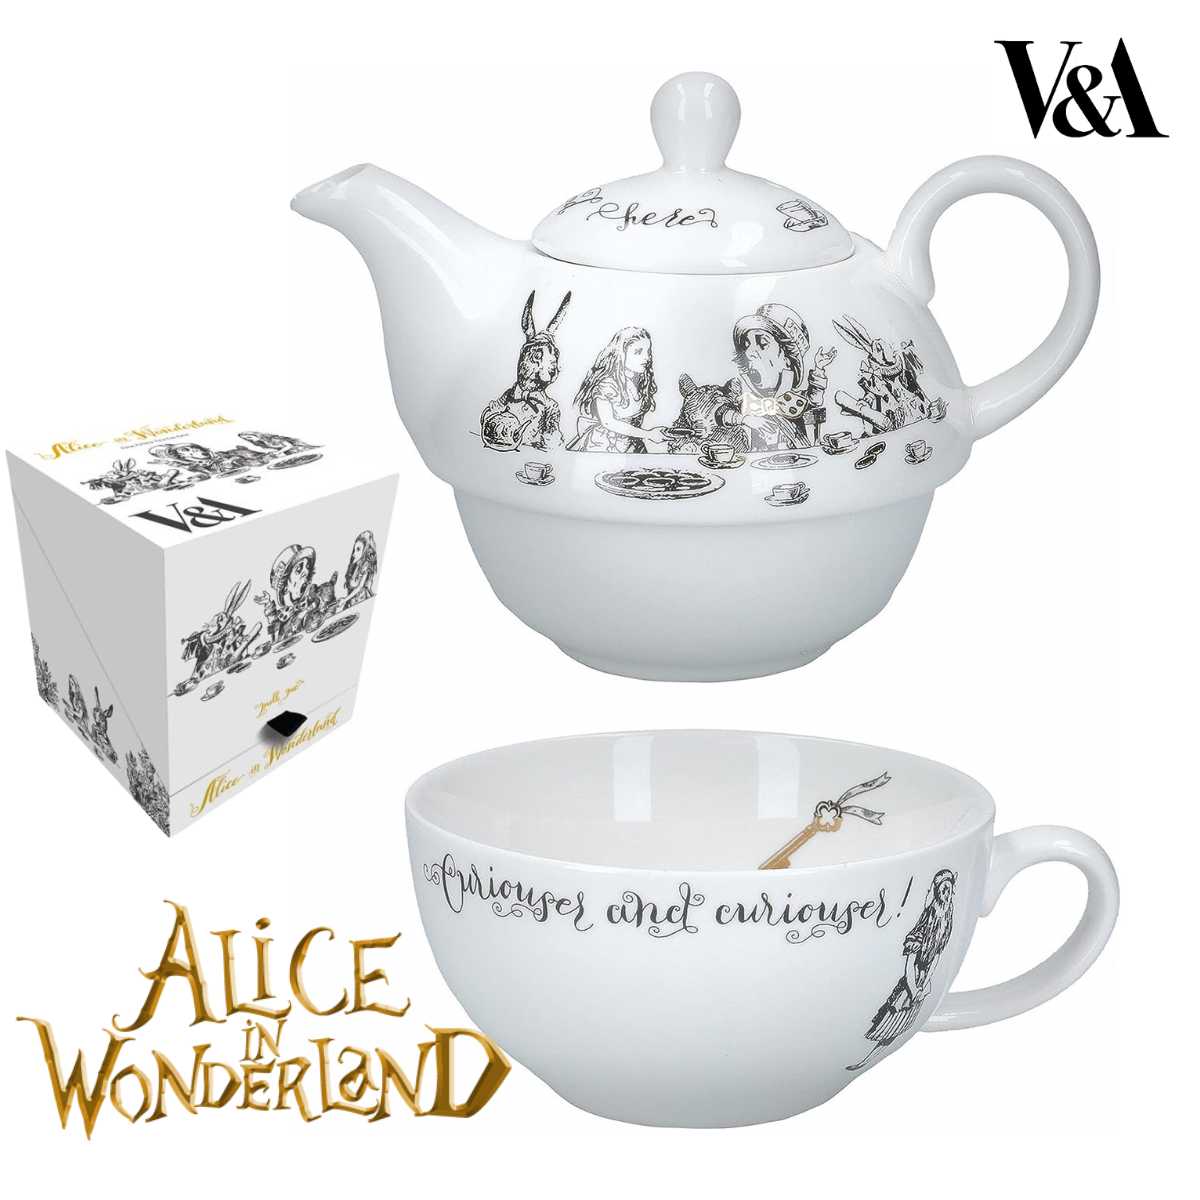 Victoria And Albert Alice In Wonderland V&A Alice Tea for one ポット&カップ ヴィクトリア&アルバートアリス イン ワンダーランド ギフト 贈答品 プレゼント 御祝 記念品 食器 ポット カップ セット ファインチャイナ